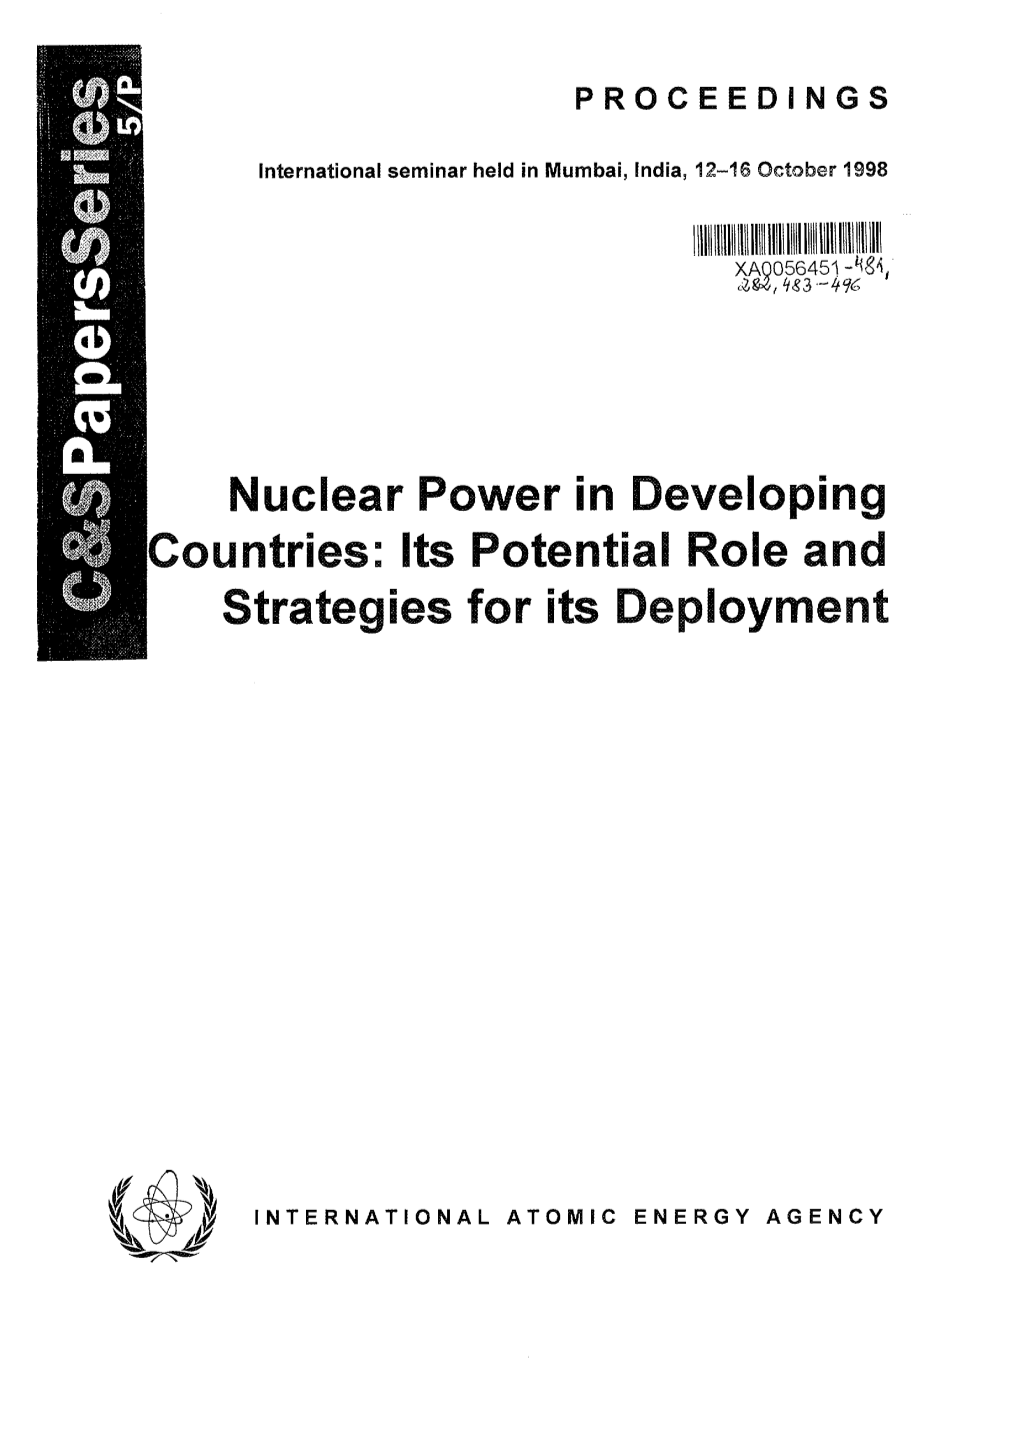 Nuclear Power in Developing Icountries: Its Potential Role and Strategies for Its Deployment